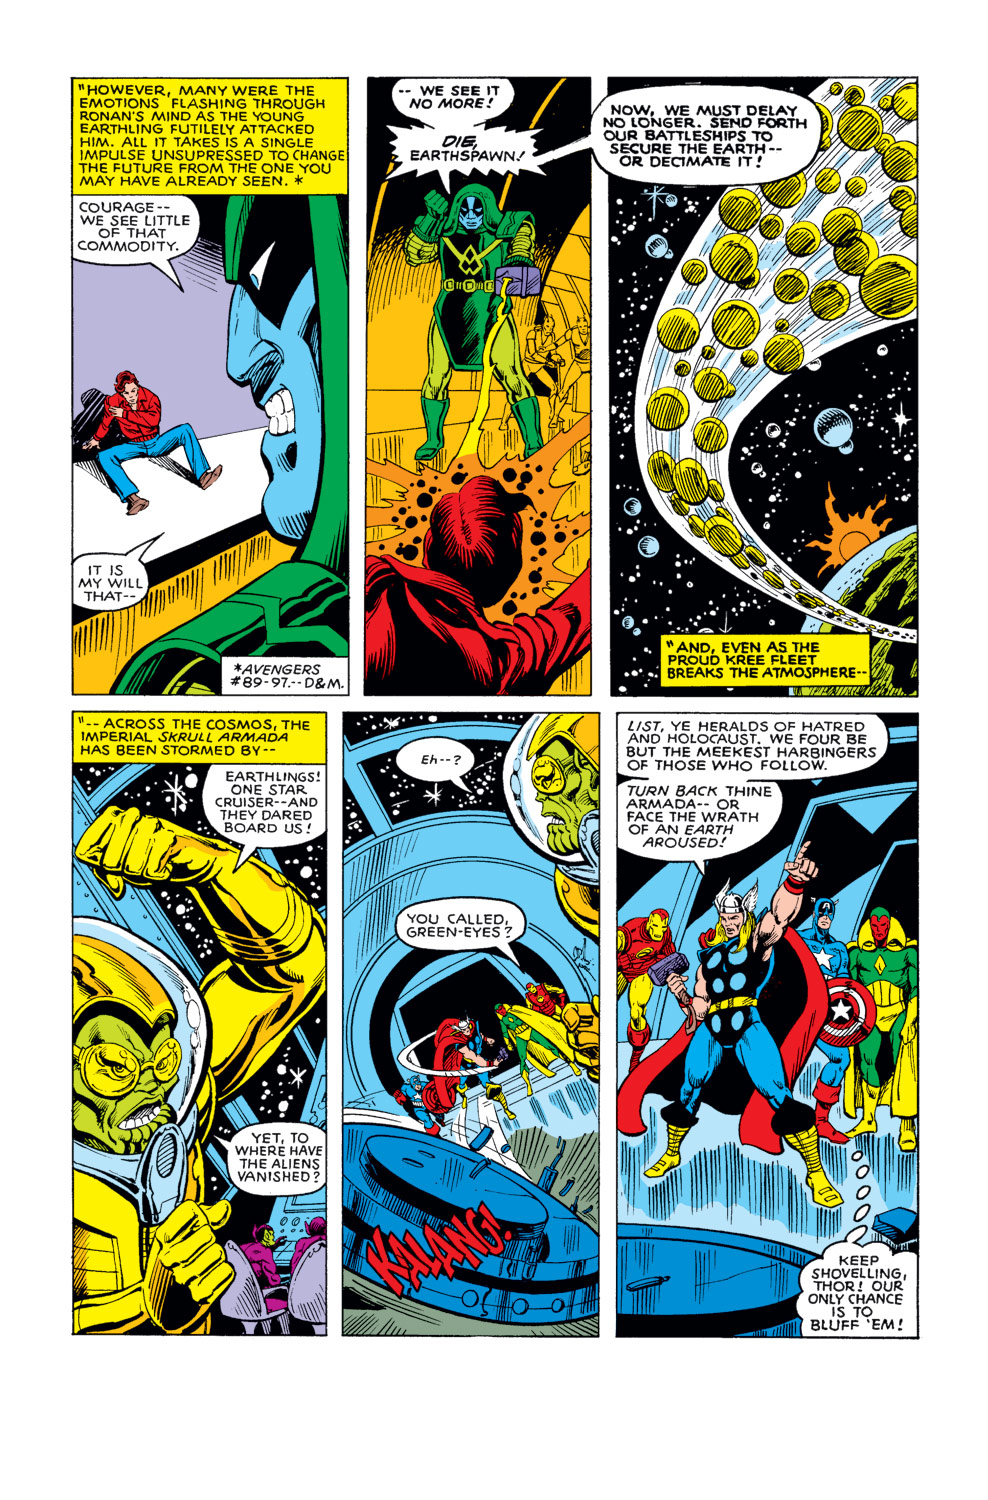 What If? (1977) issue 20 - The Avengers fought the Kree-Skrull war without Rick Jones - Page 6